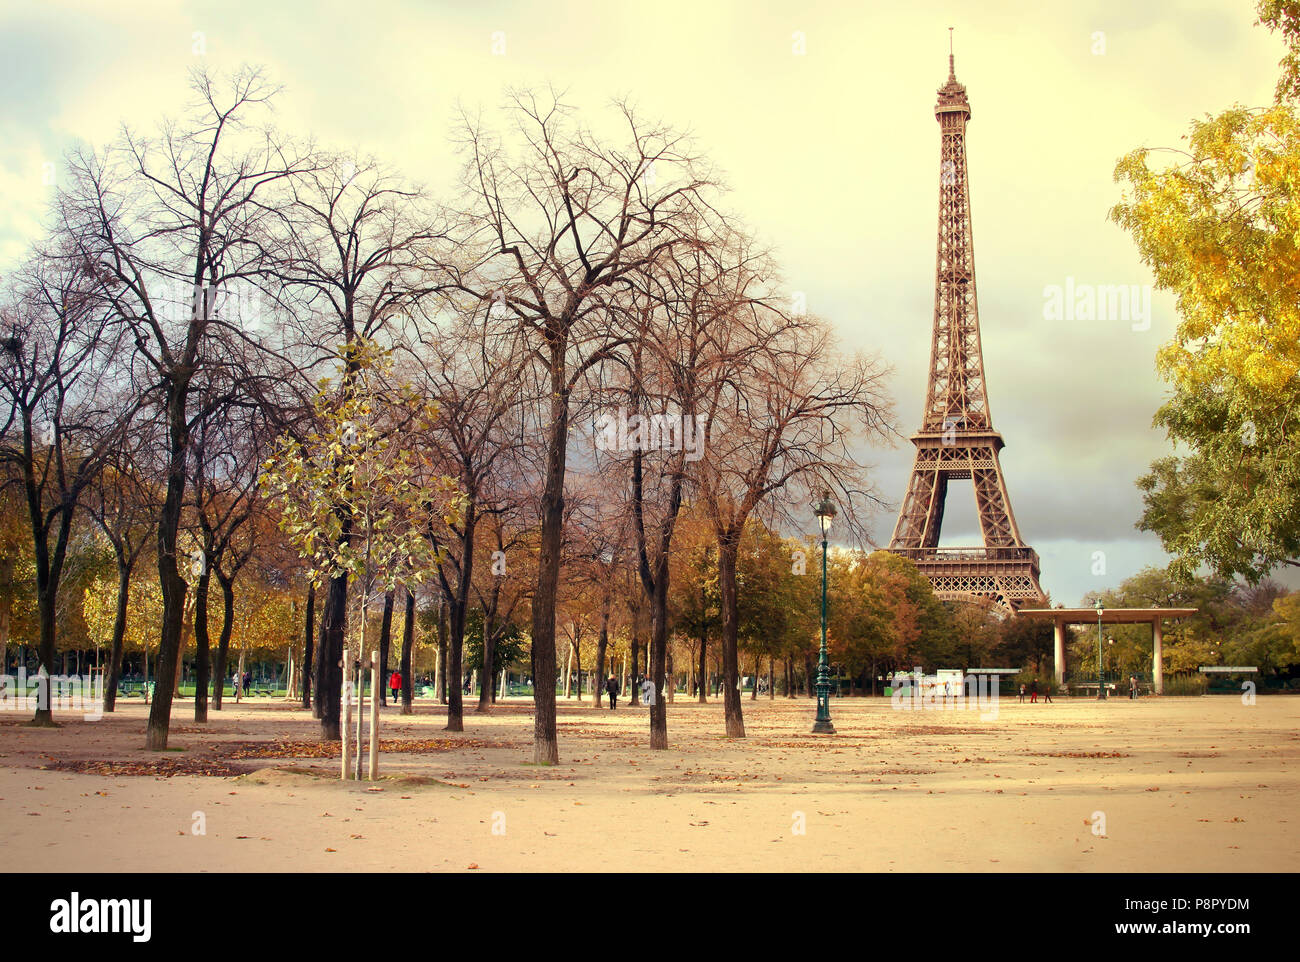 view of Eiffel tower in paris across the park, artistic filter applied to the picture Stock Photo